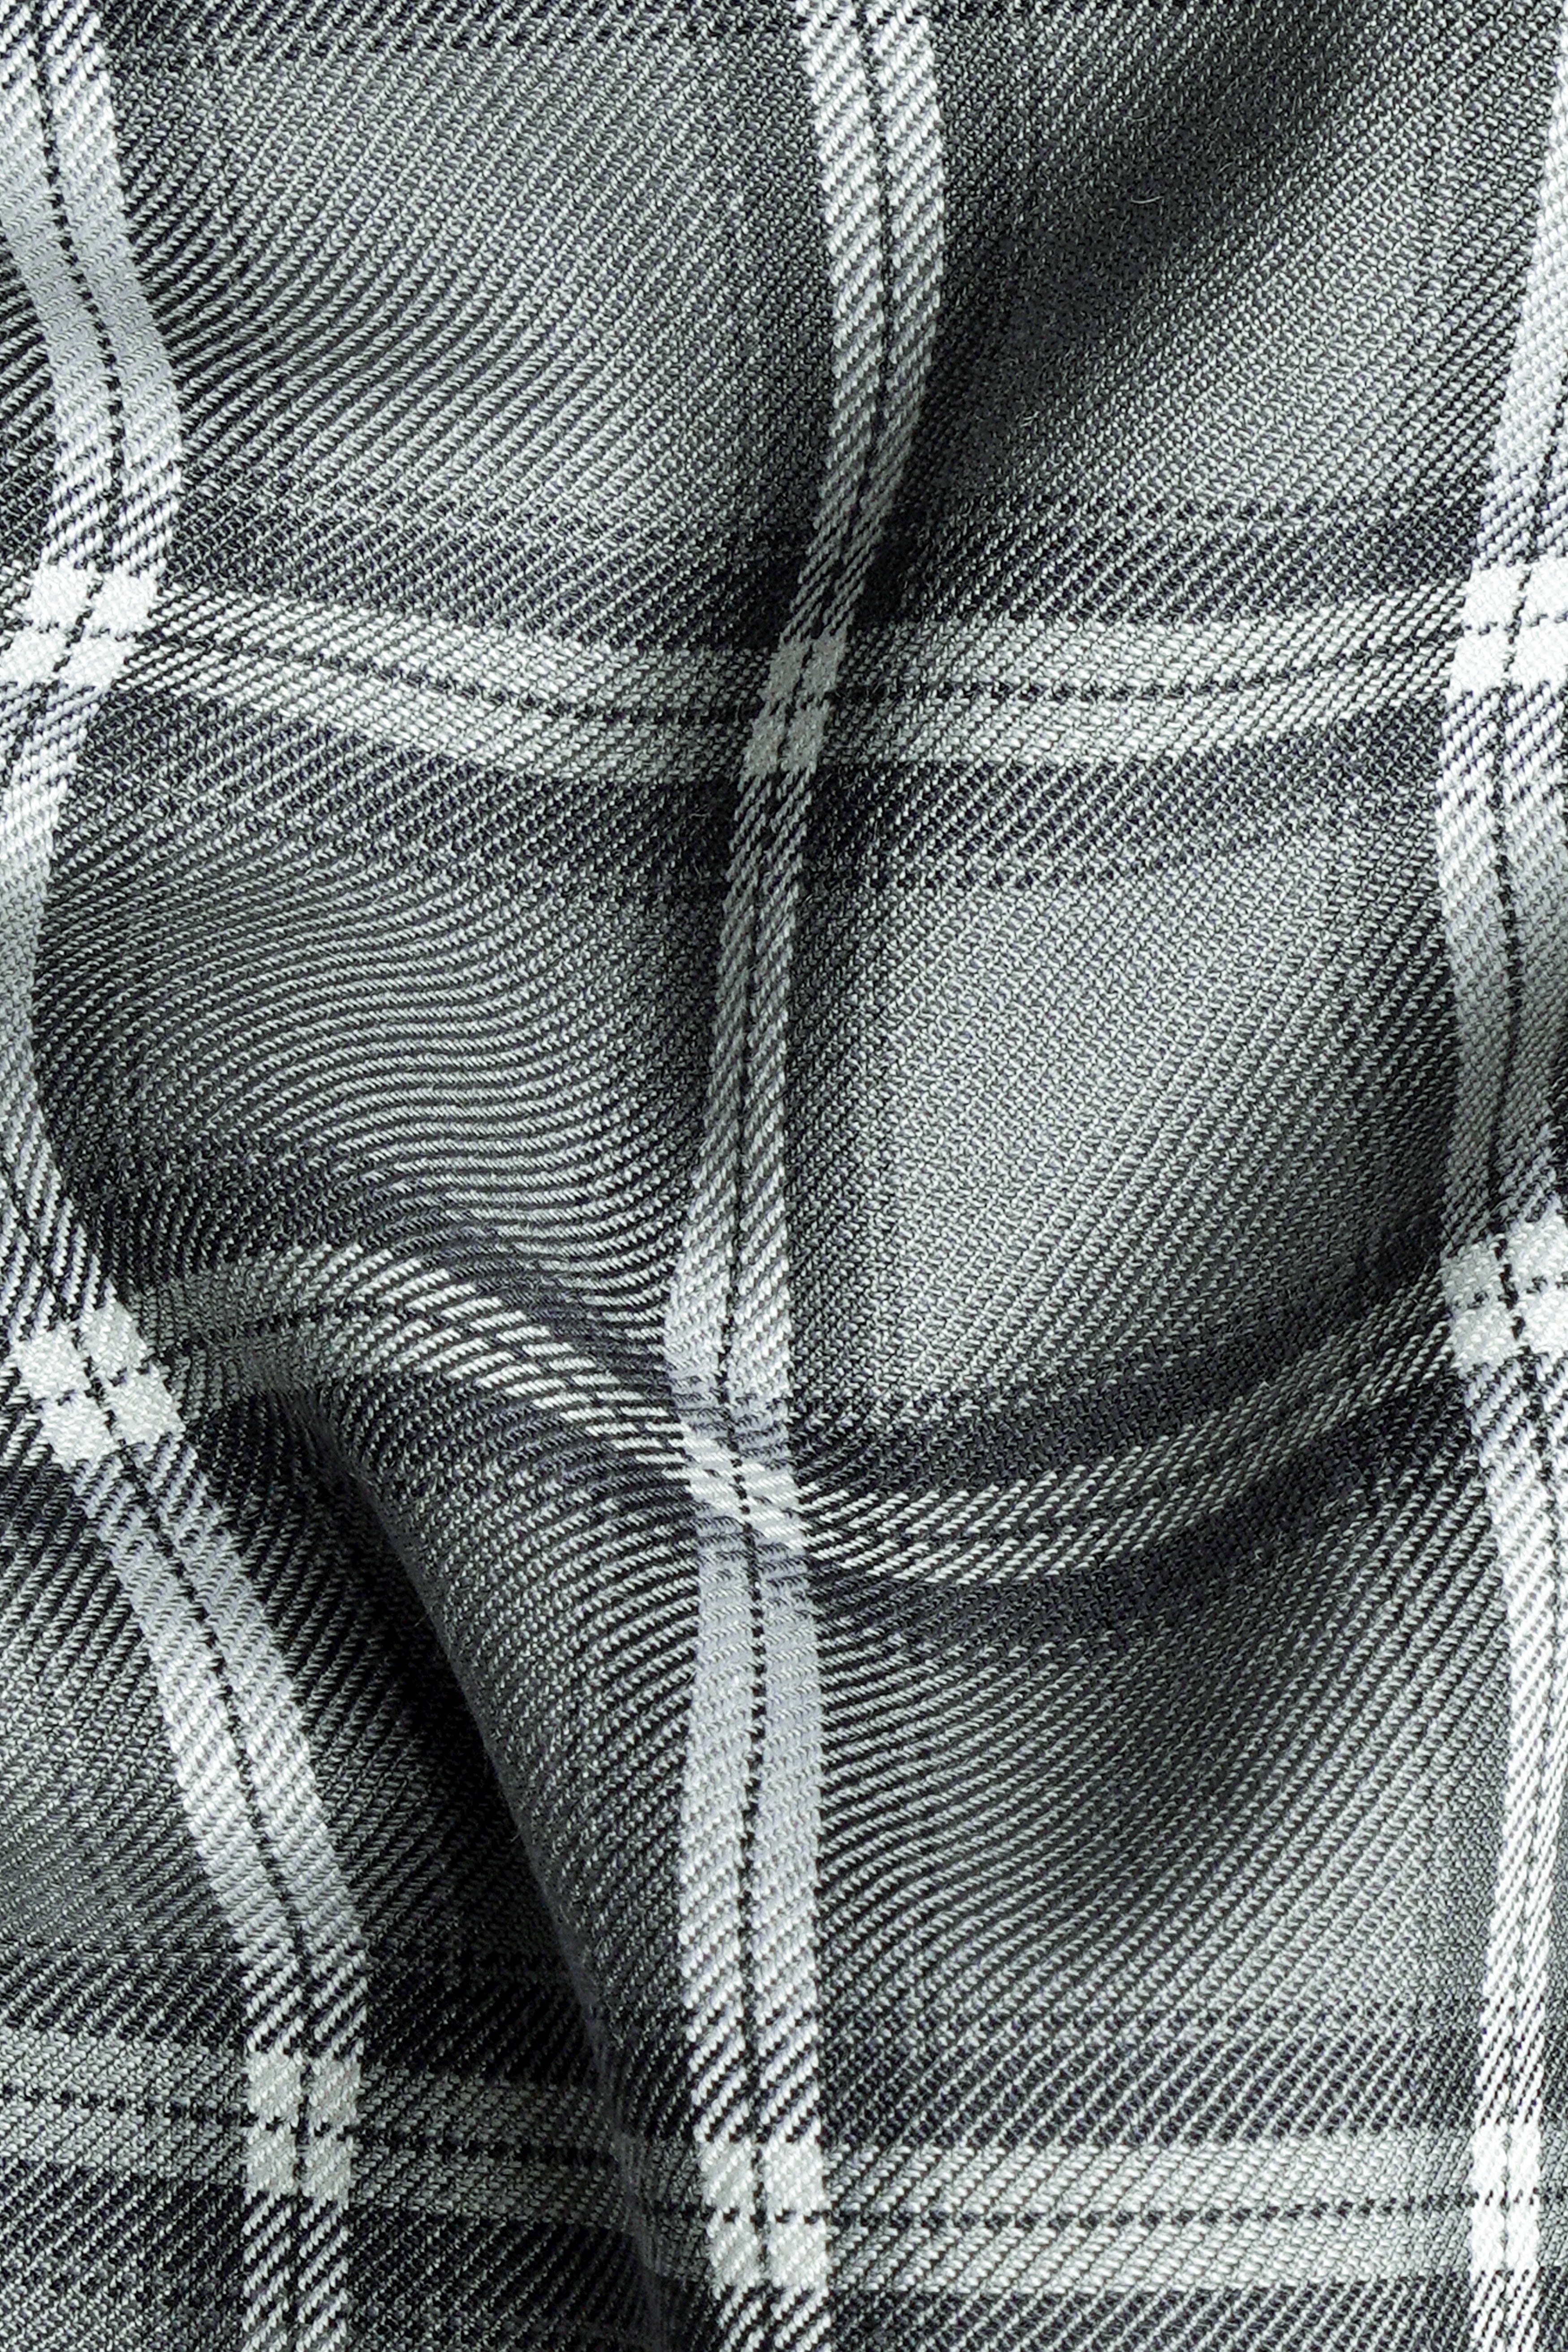 Pewter Gray and White Windowpane Wool Rich Pant